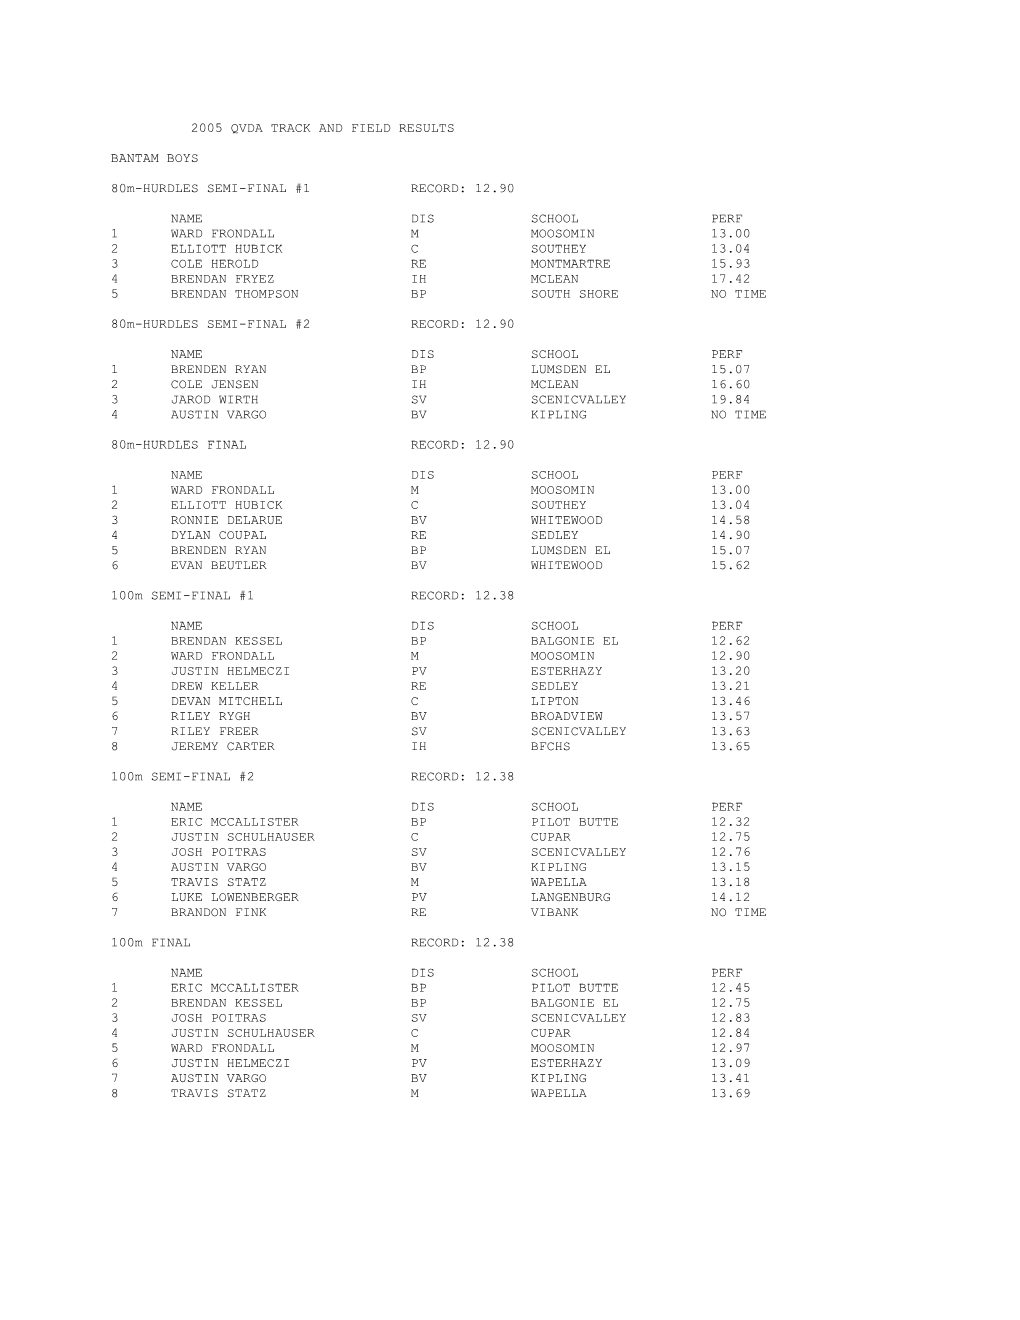 2005 Qvda Track and Field Results